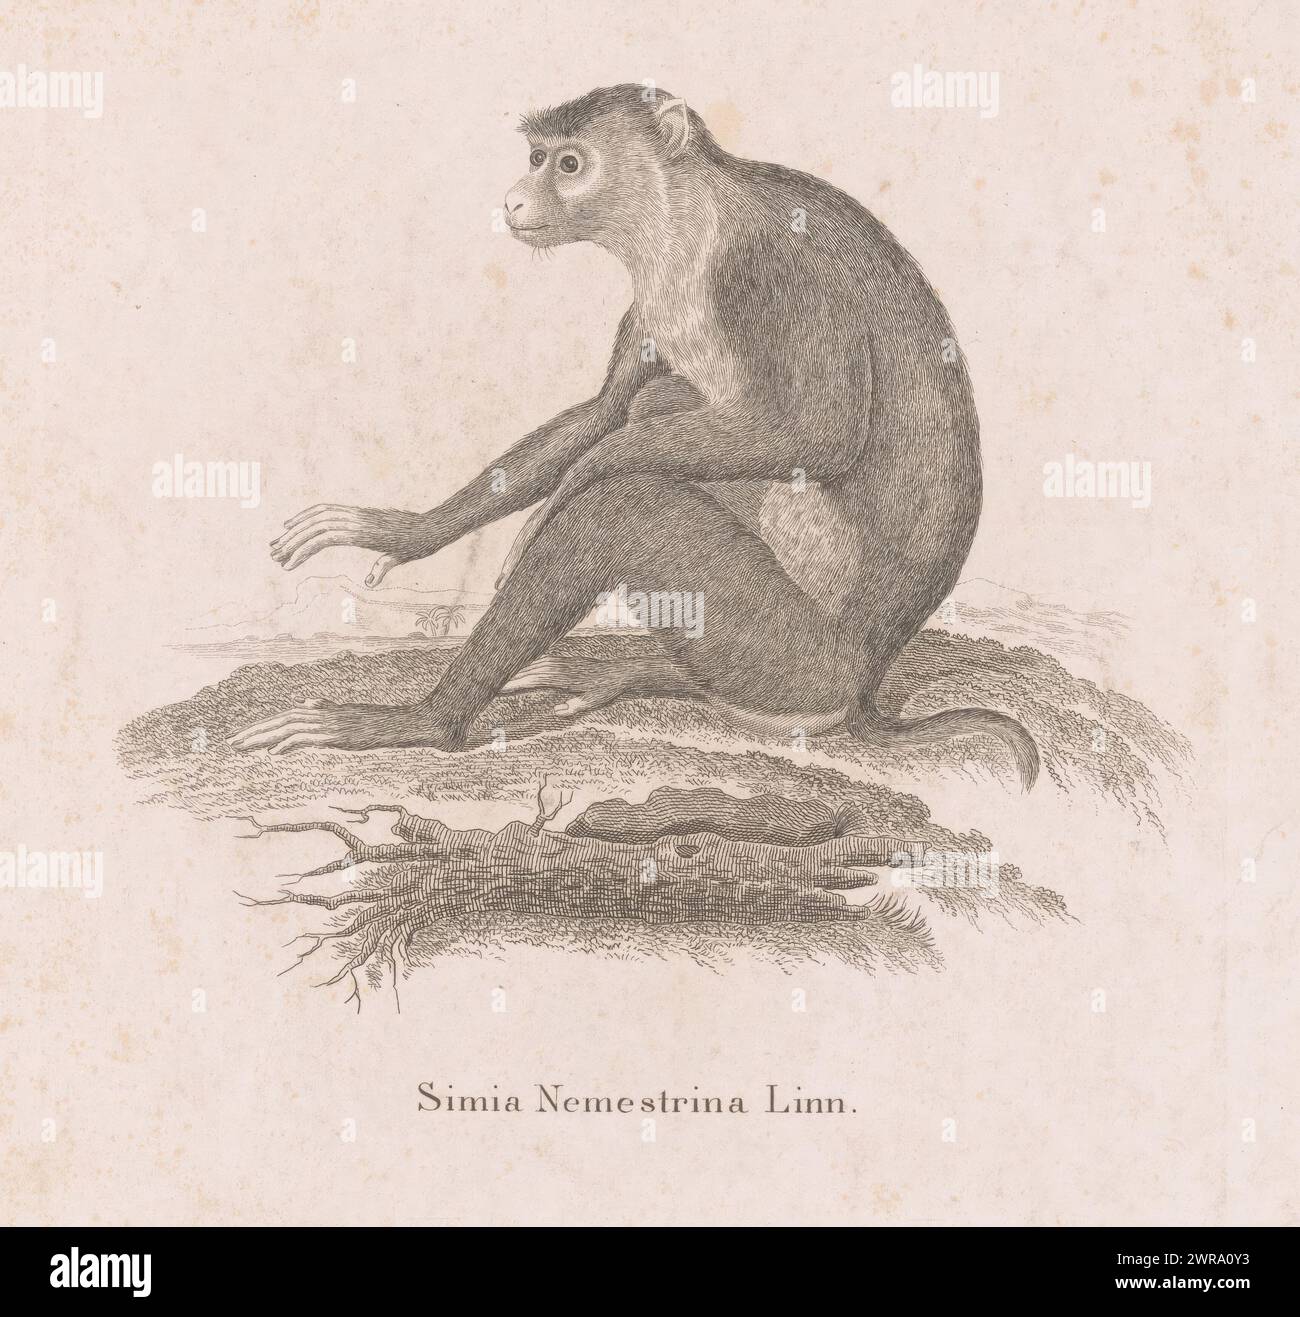 Macaque sitting in a landscape, Simia Nemestrina Linn (title on object), According to the title, it concerns the lampoon monkey (simia nemestrina) described by Carolus Linnaeus. Numbered top right: IX., print maker: G.W. Kuhn, after painting by: Jean Baptiste Huet (le jeune), (possibly), Leipzig, 1766 - 1799, paper, steel engraving, height 242 mm × width 180 mm, print Stock Photo